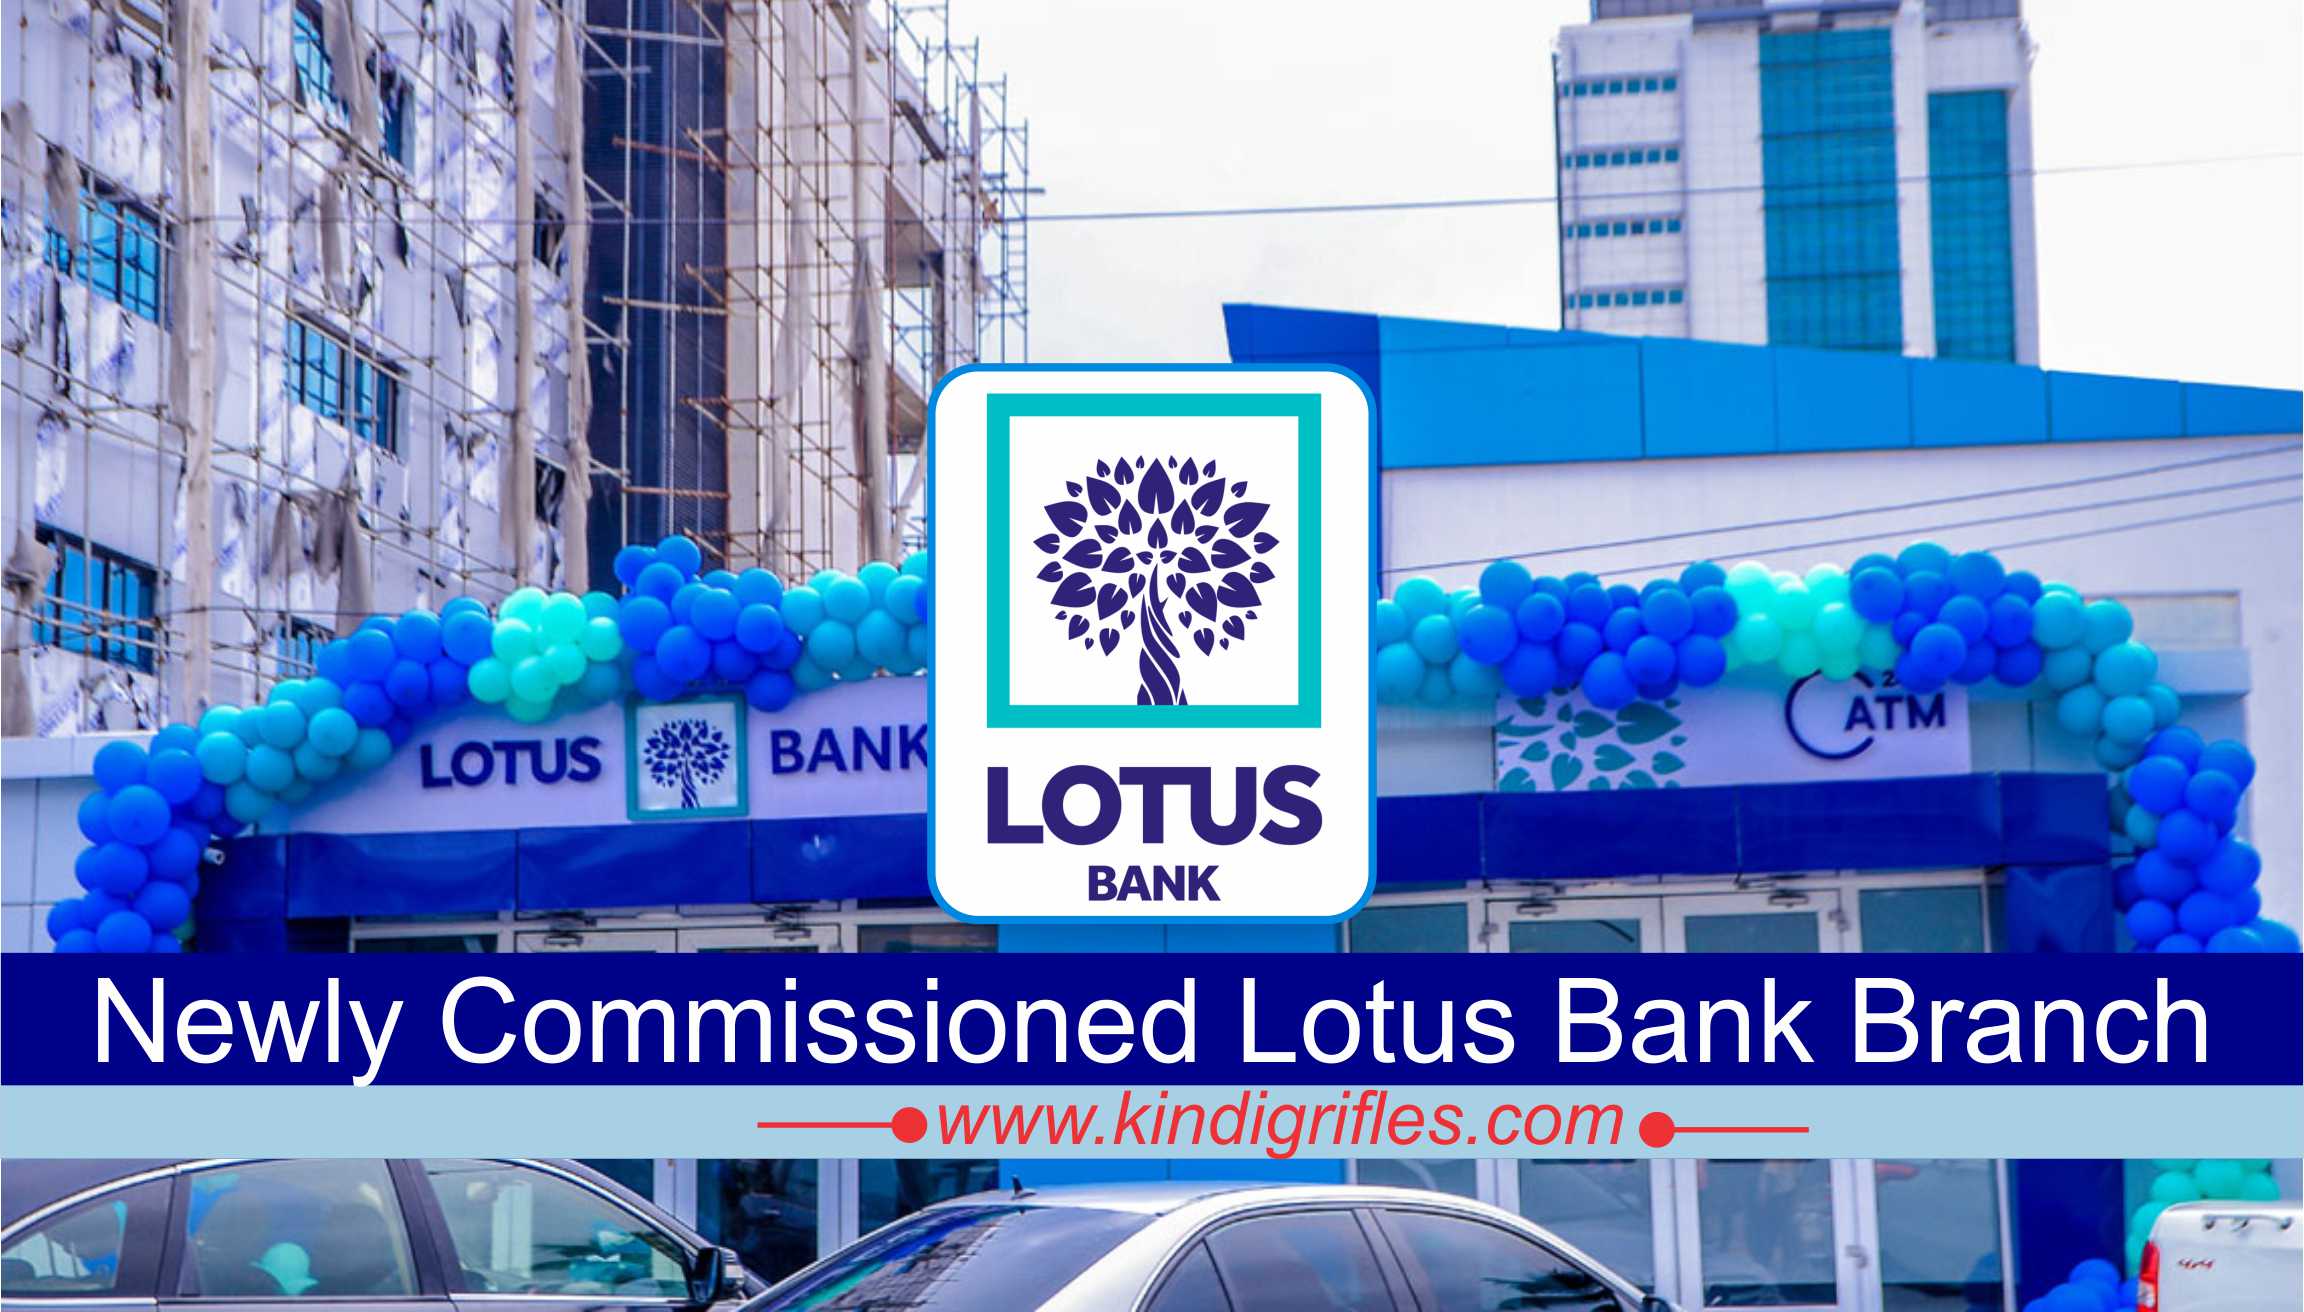 Newly Commissioned Lotus Bank